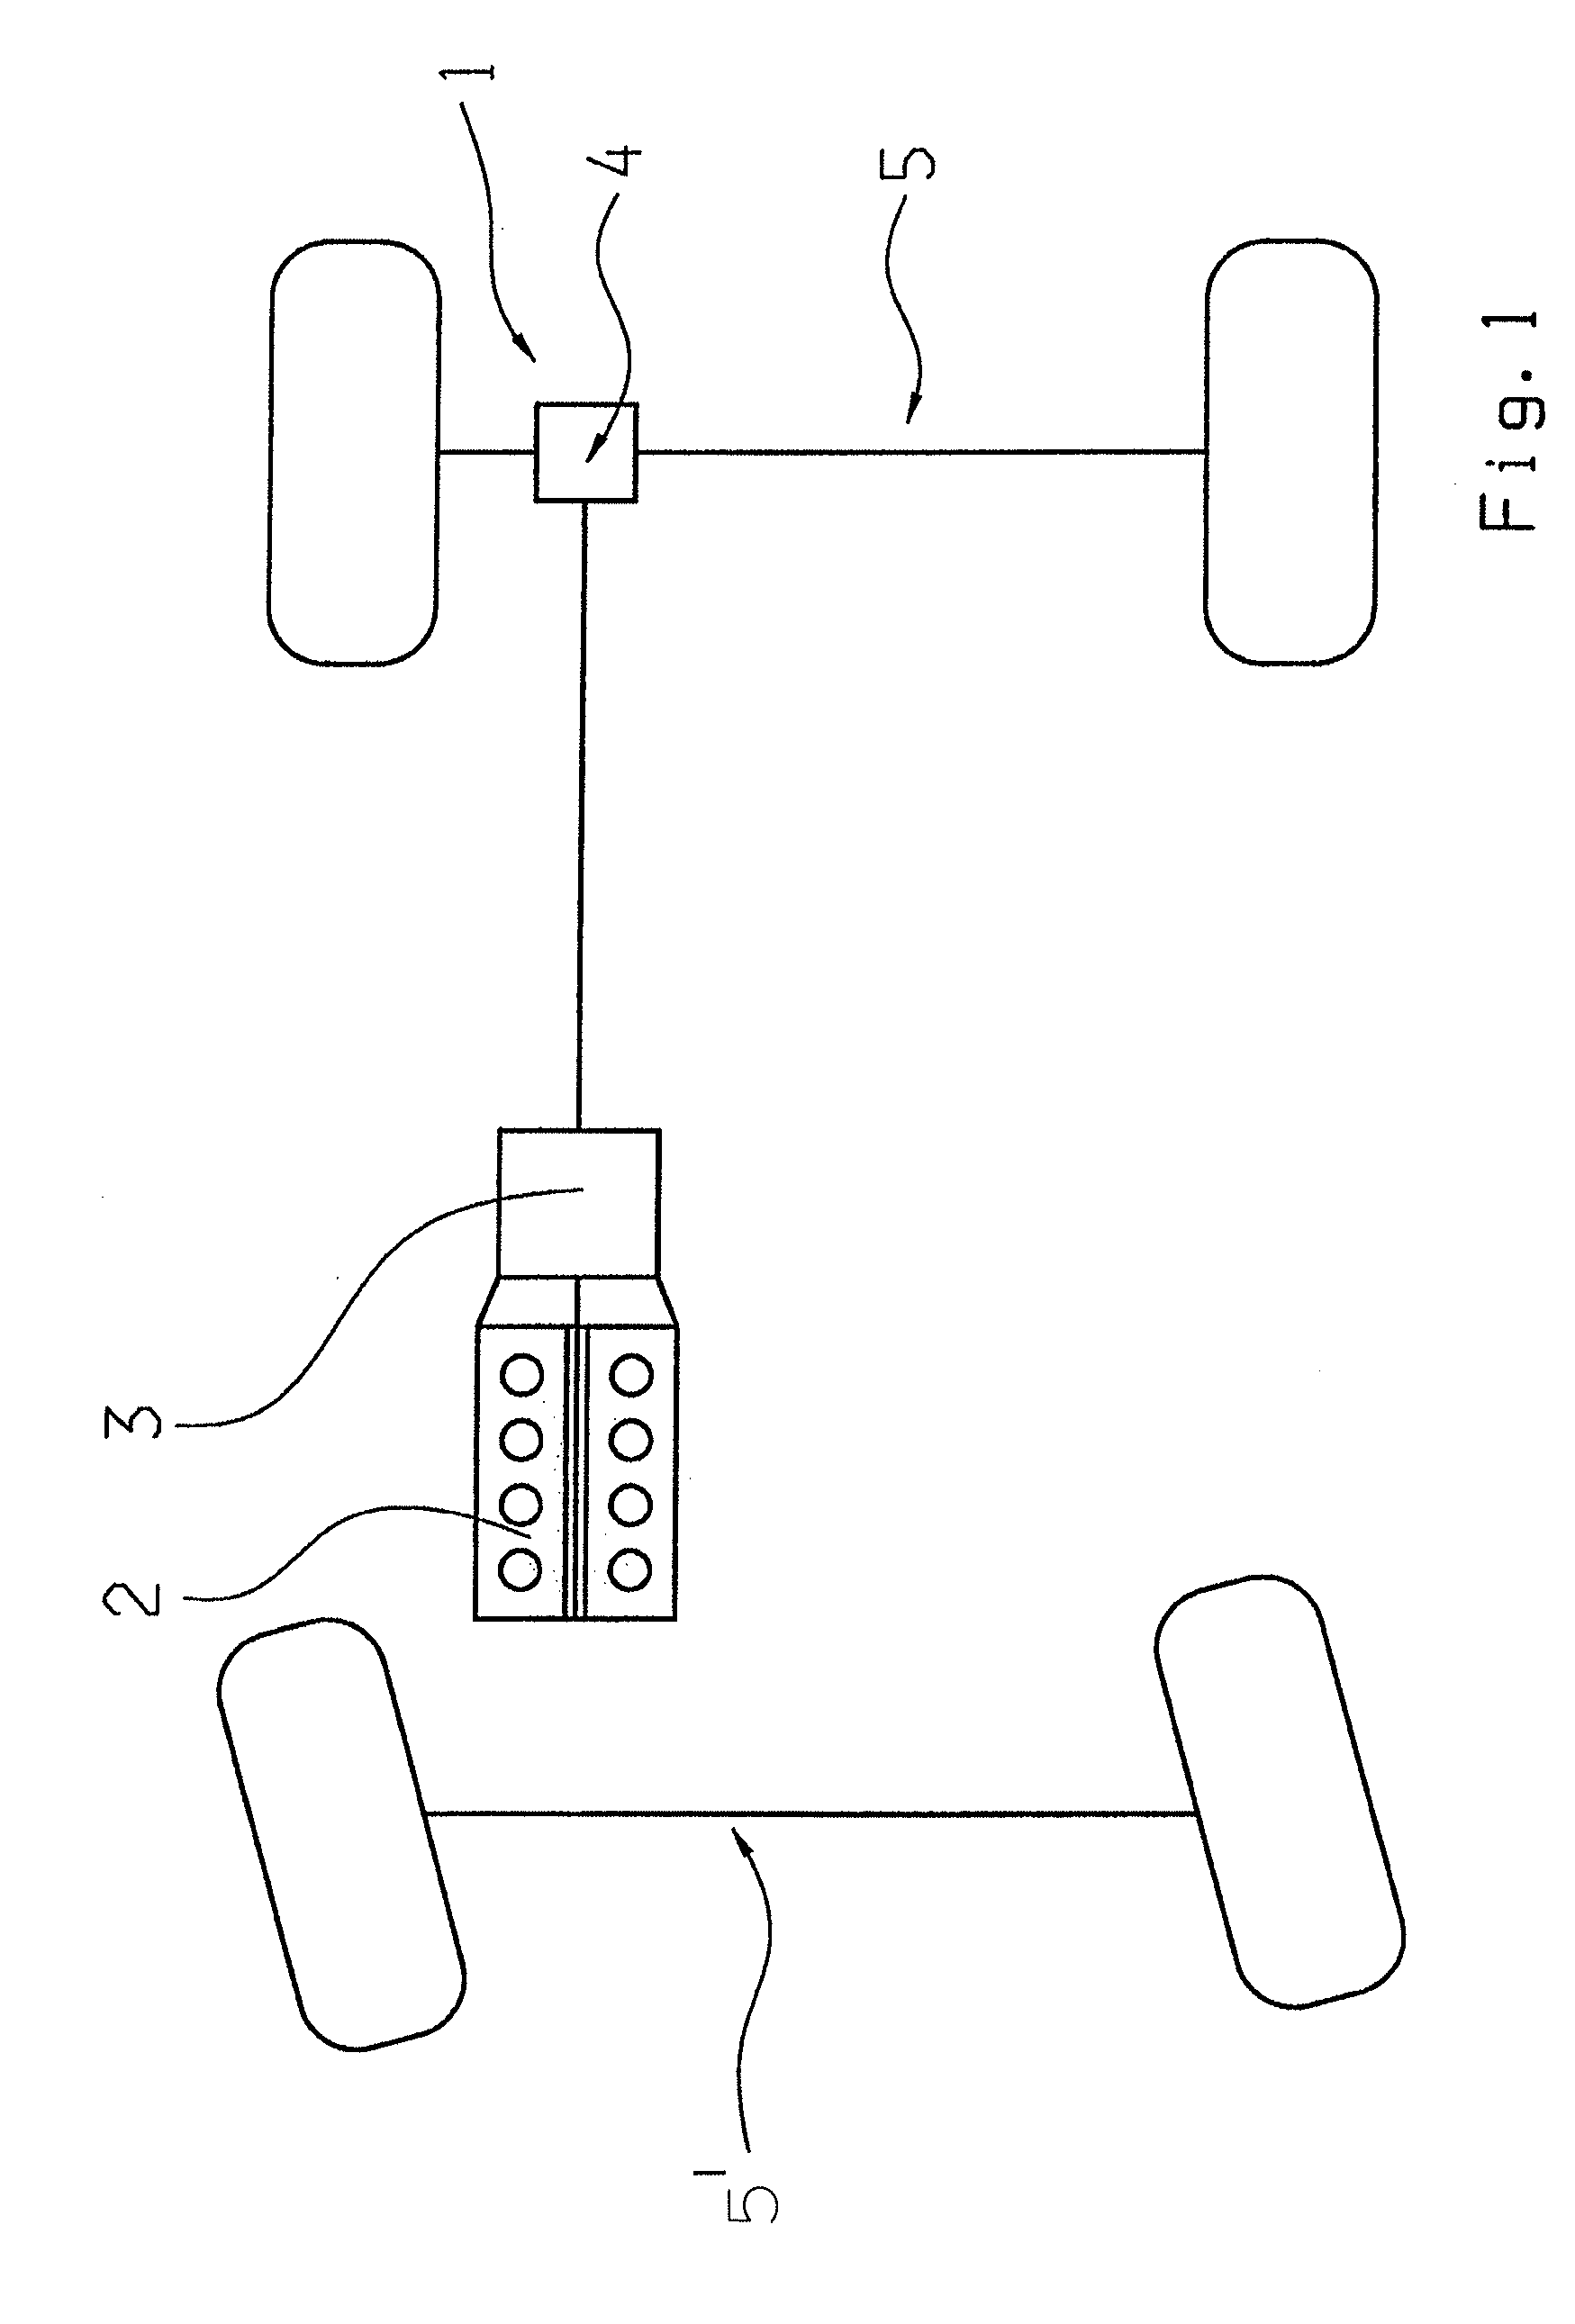 Method for operating a transmission device having a plurality of friction-fit shift elements and at least one form-fit shift element